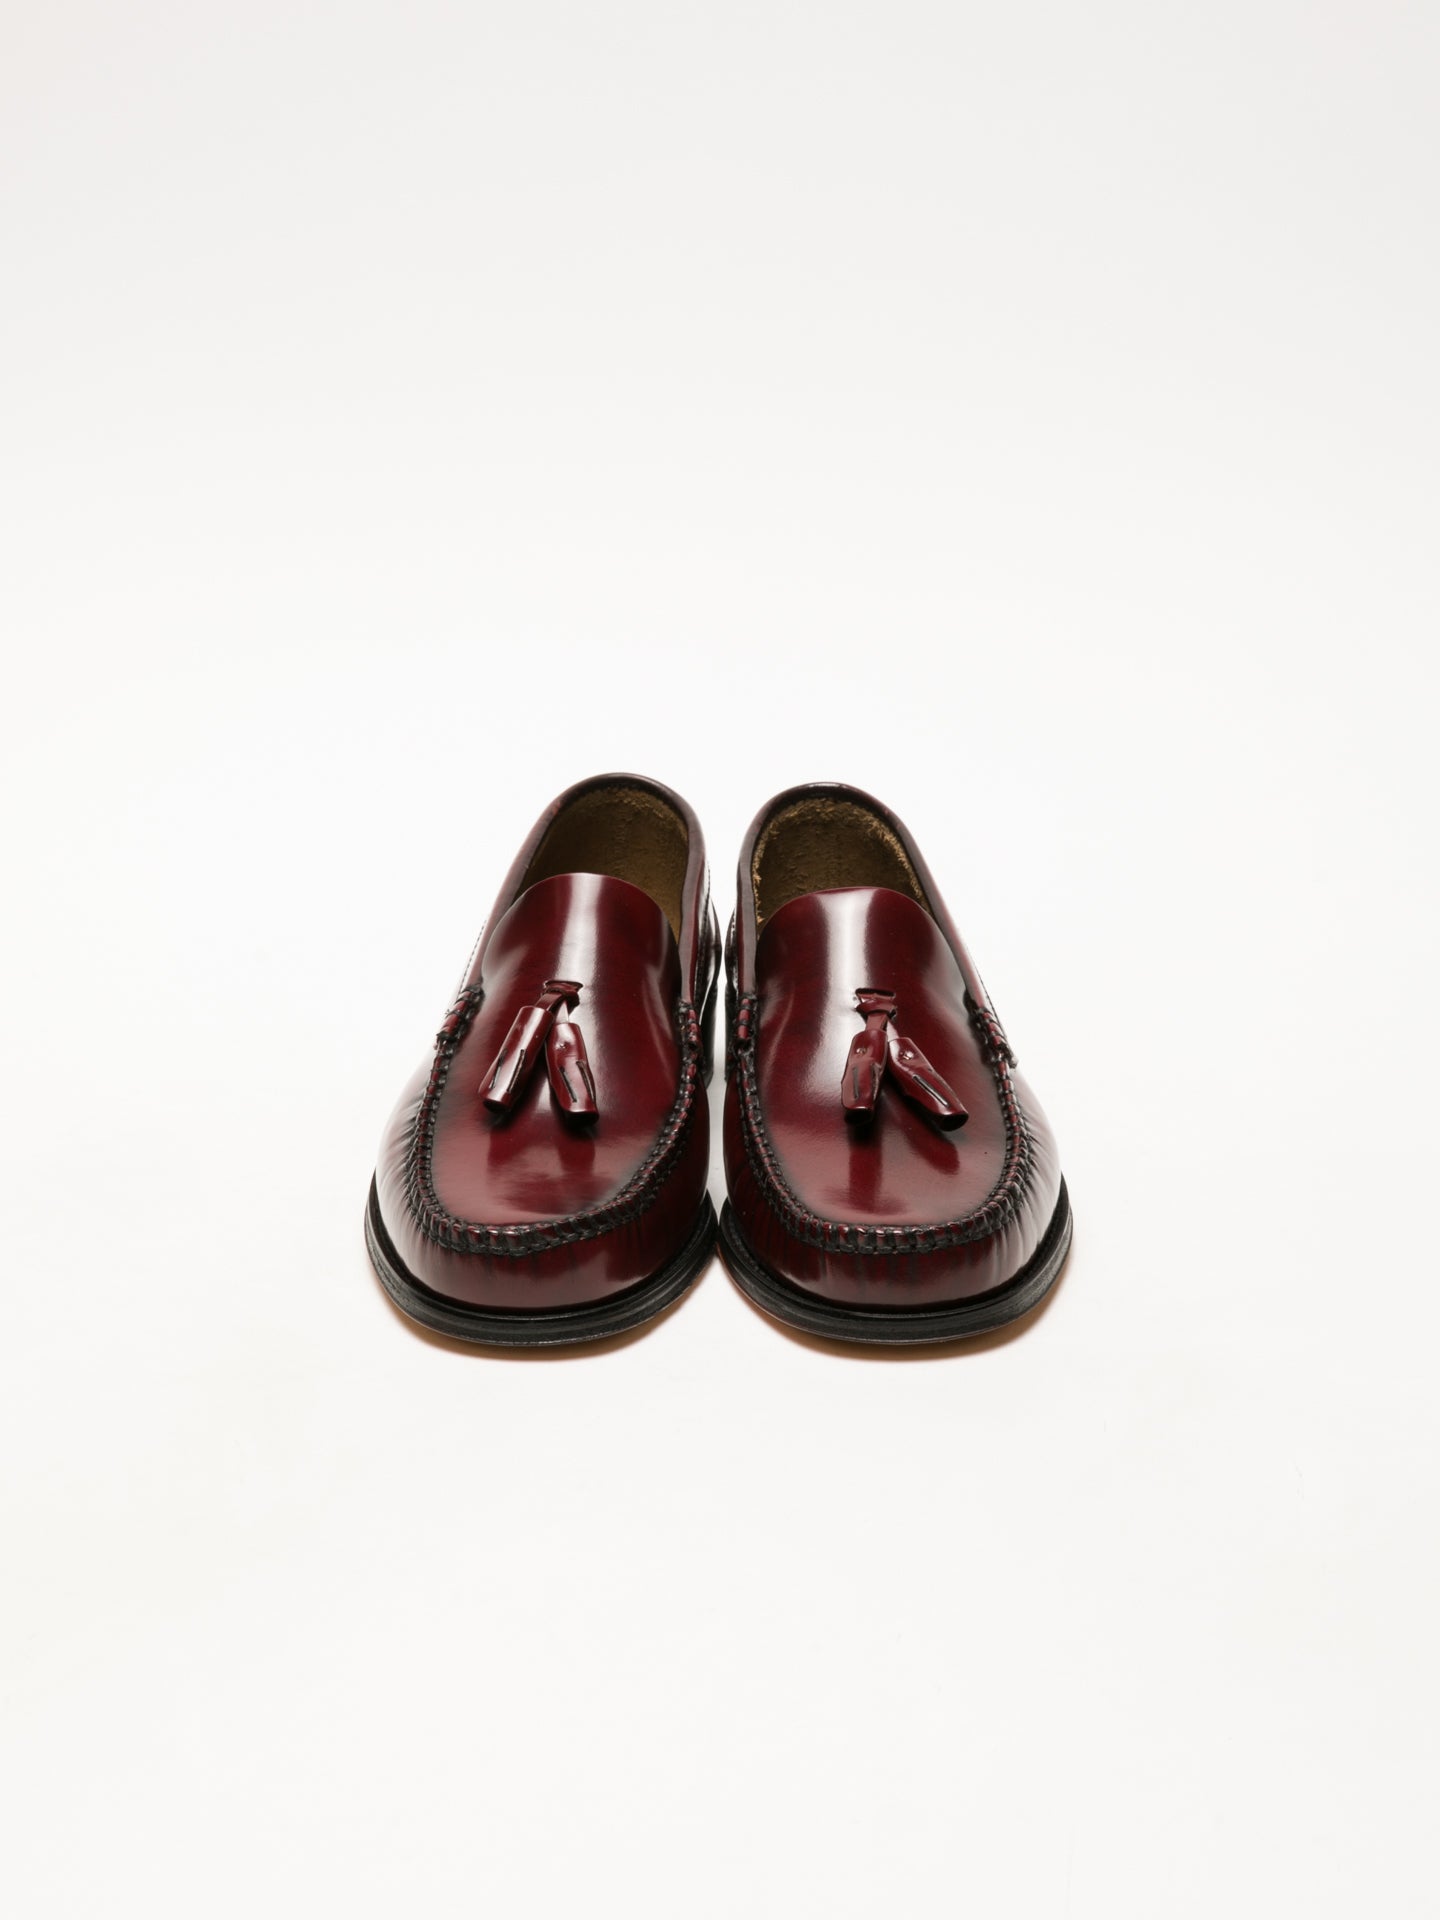 Sotoalto DarkRed Loafers Shoes